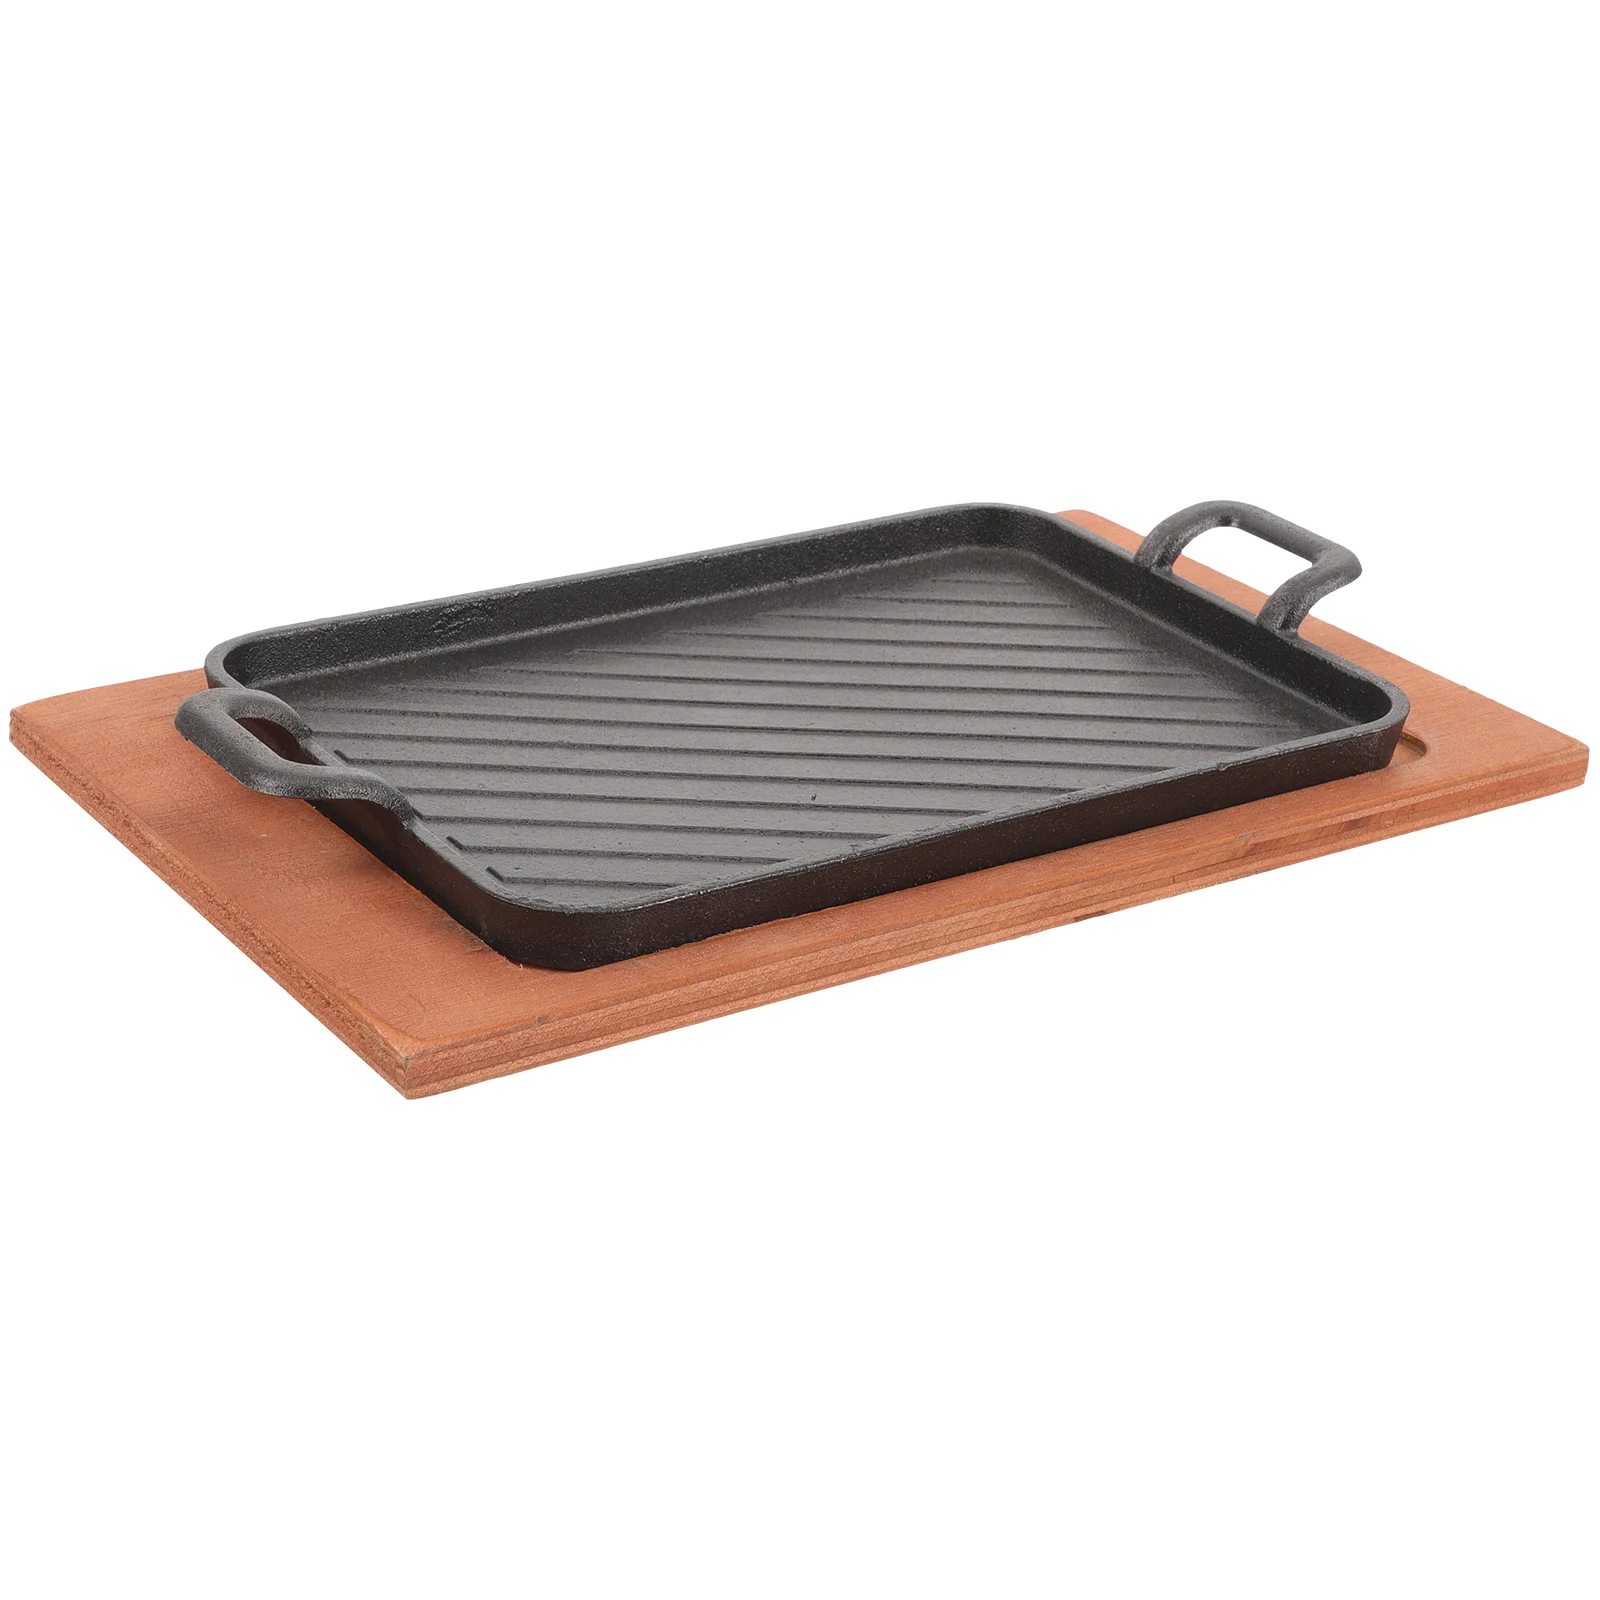 

Outdoor Grill Tray Nonstick Barbecue Pan Skillet Bakeware Bbq Meat Wooden Griddle Plate Grilled Camping Cast Iron